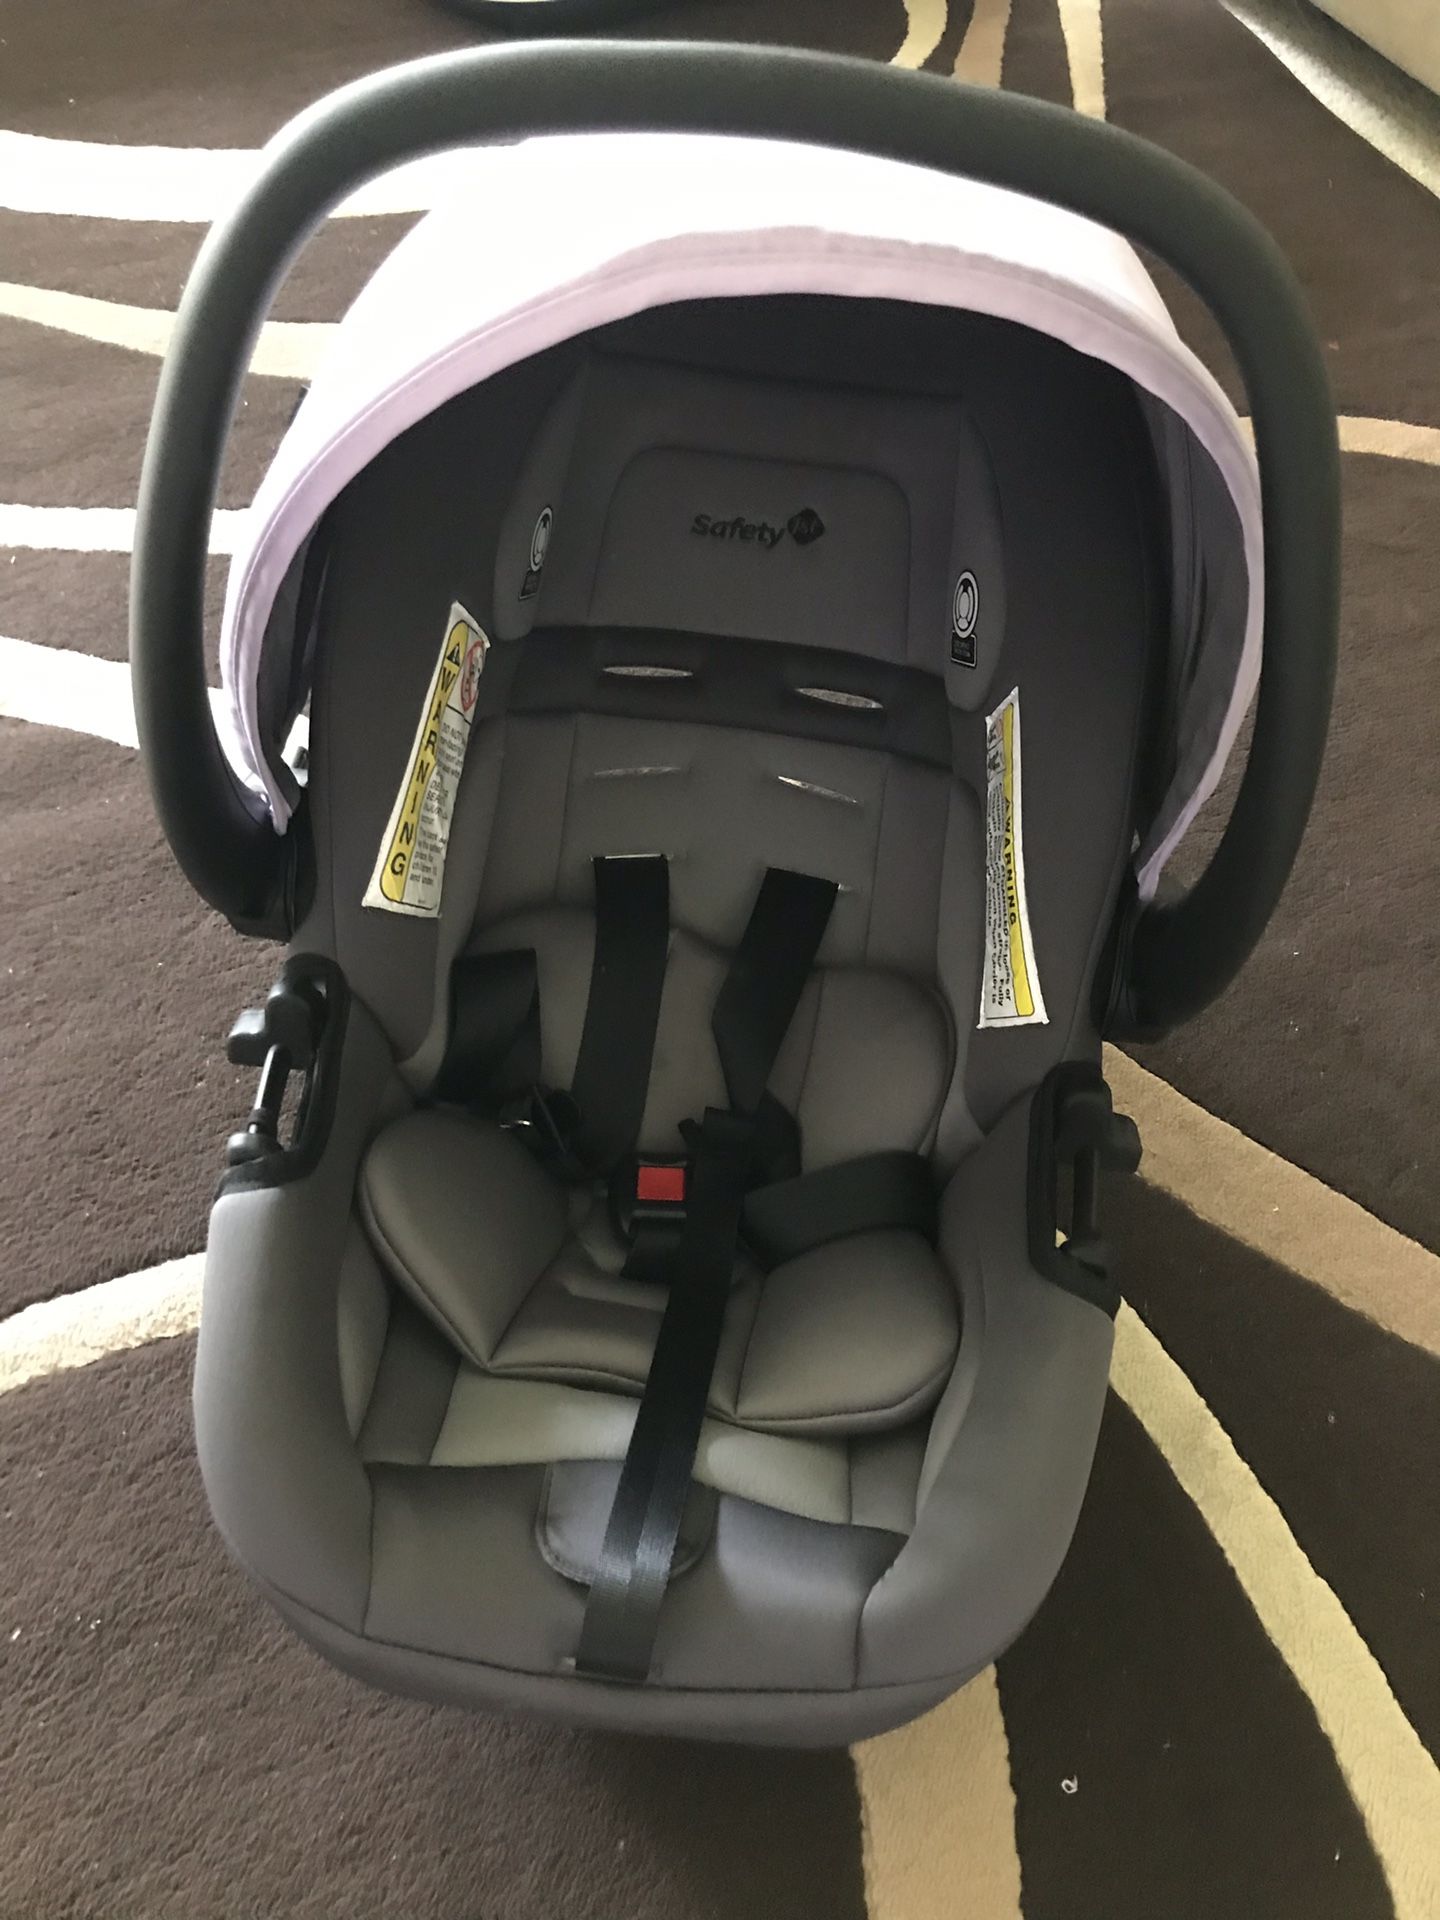 Safety first car seat with base